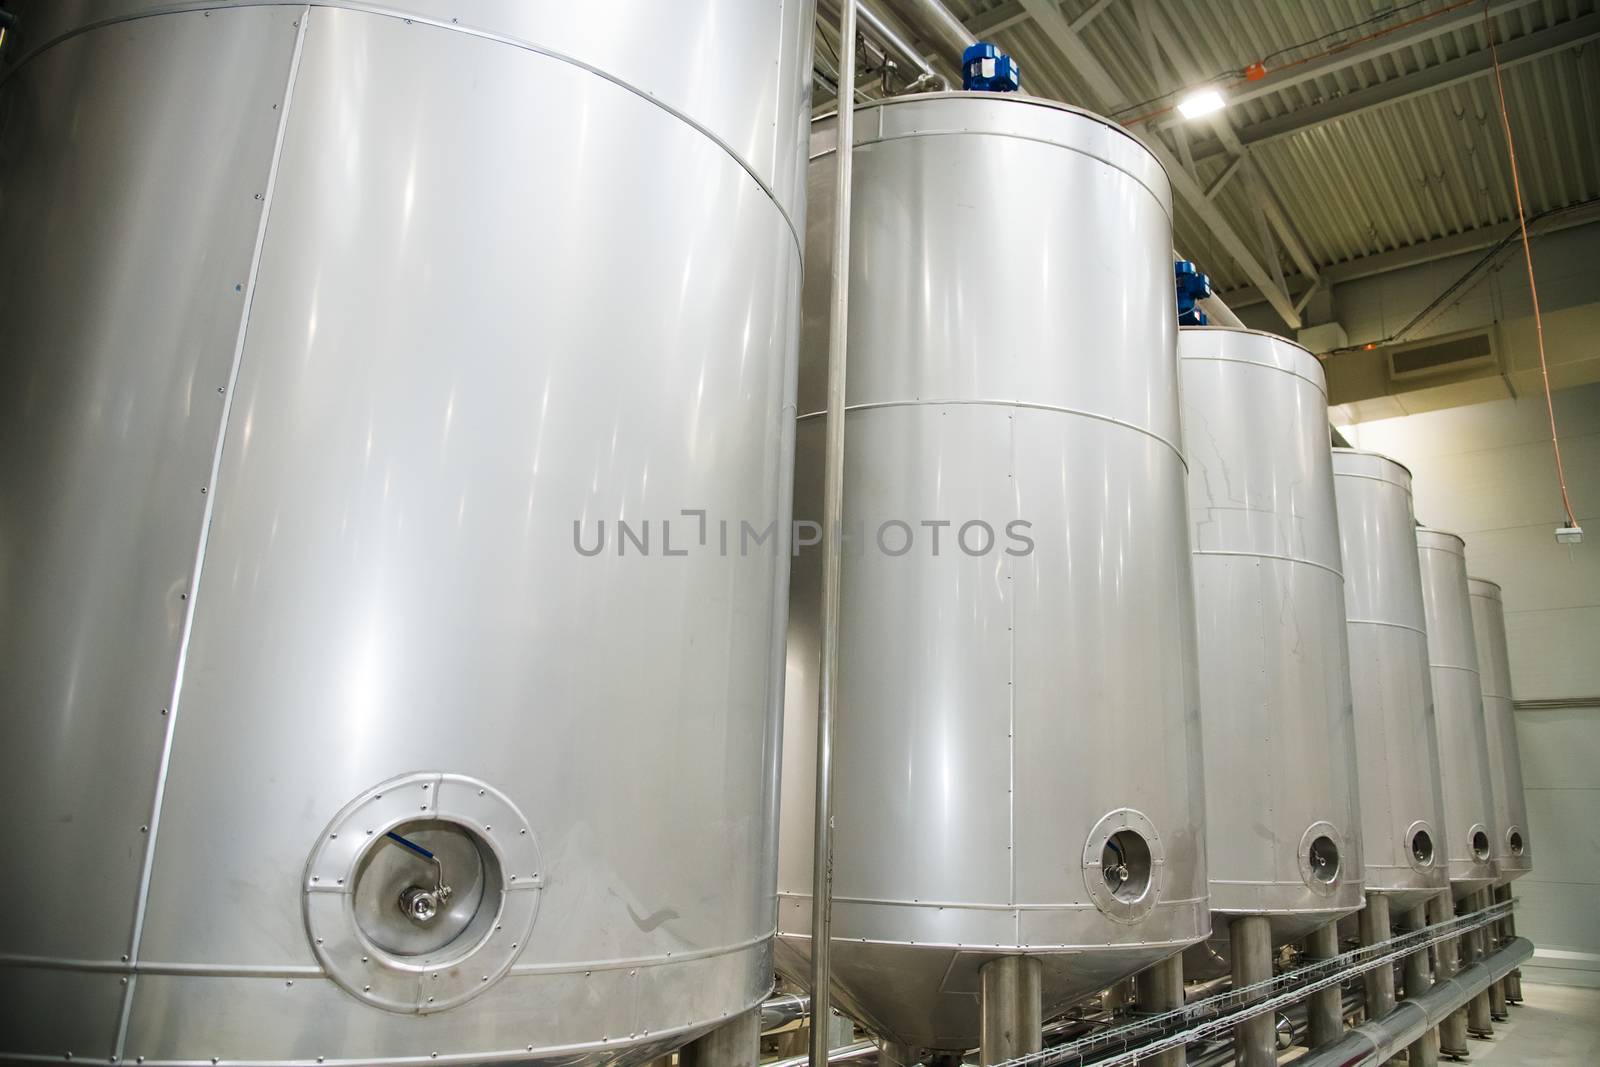 Grain processing facility inside. Industrial factory silos and equipment for food production